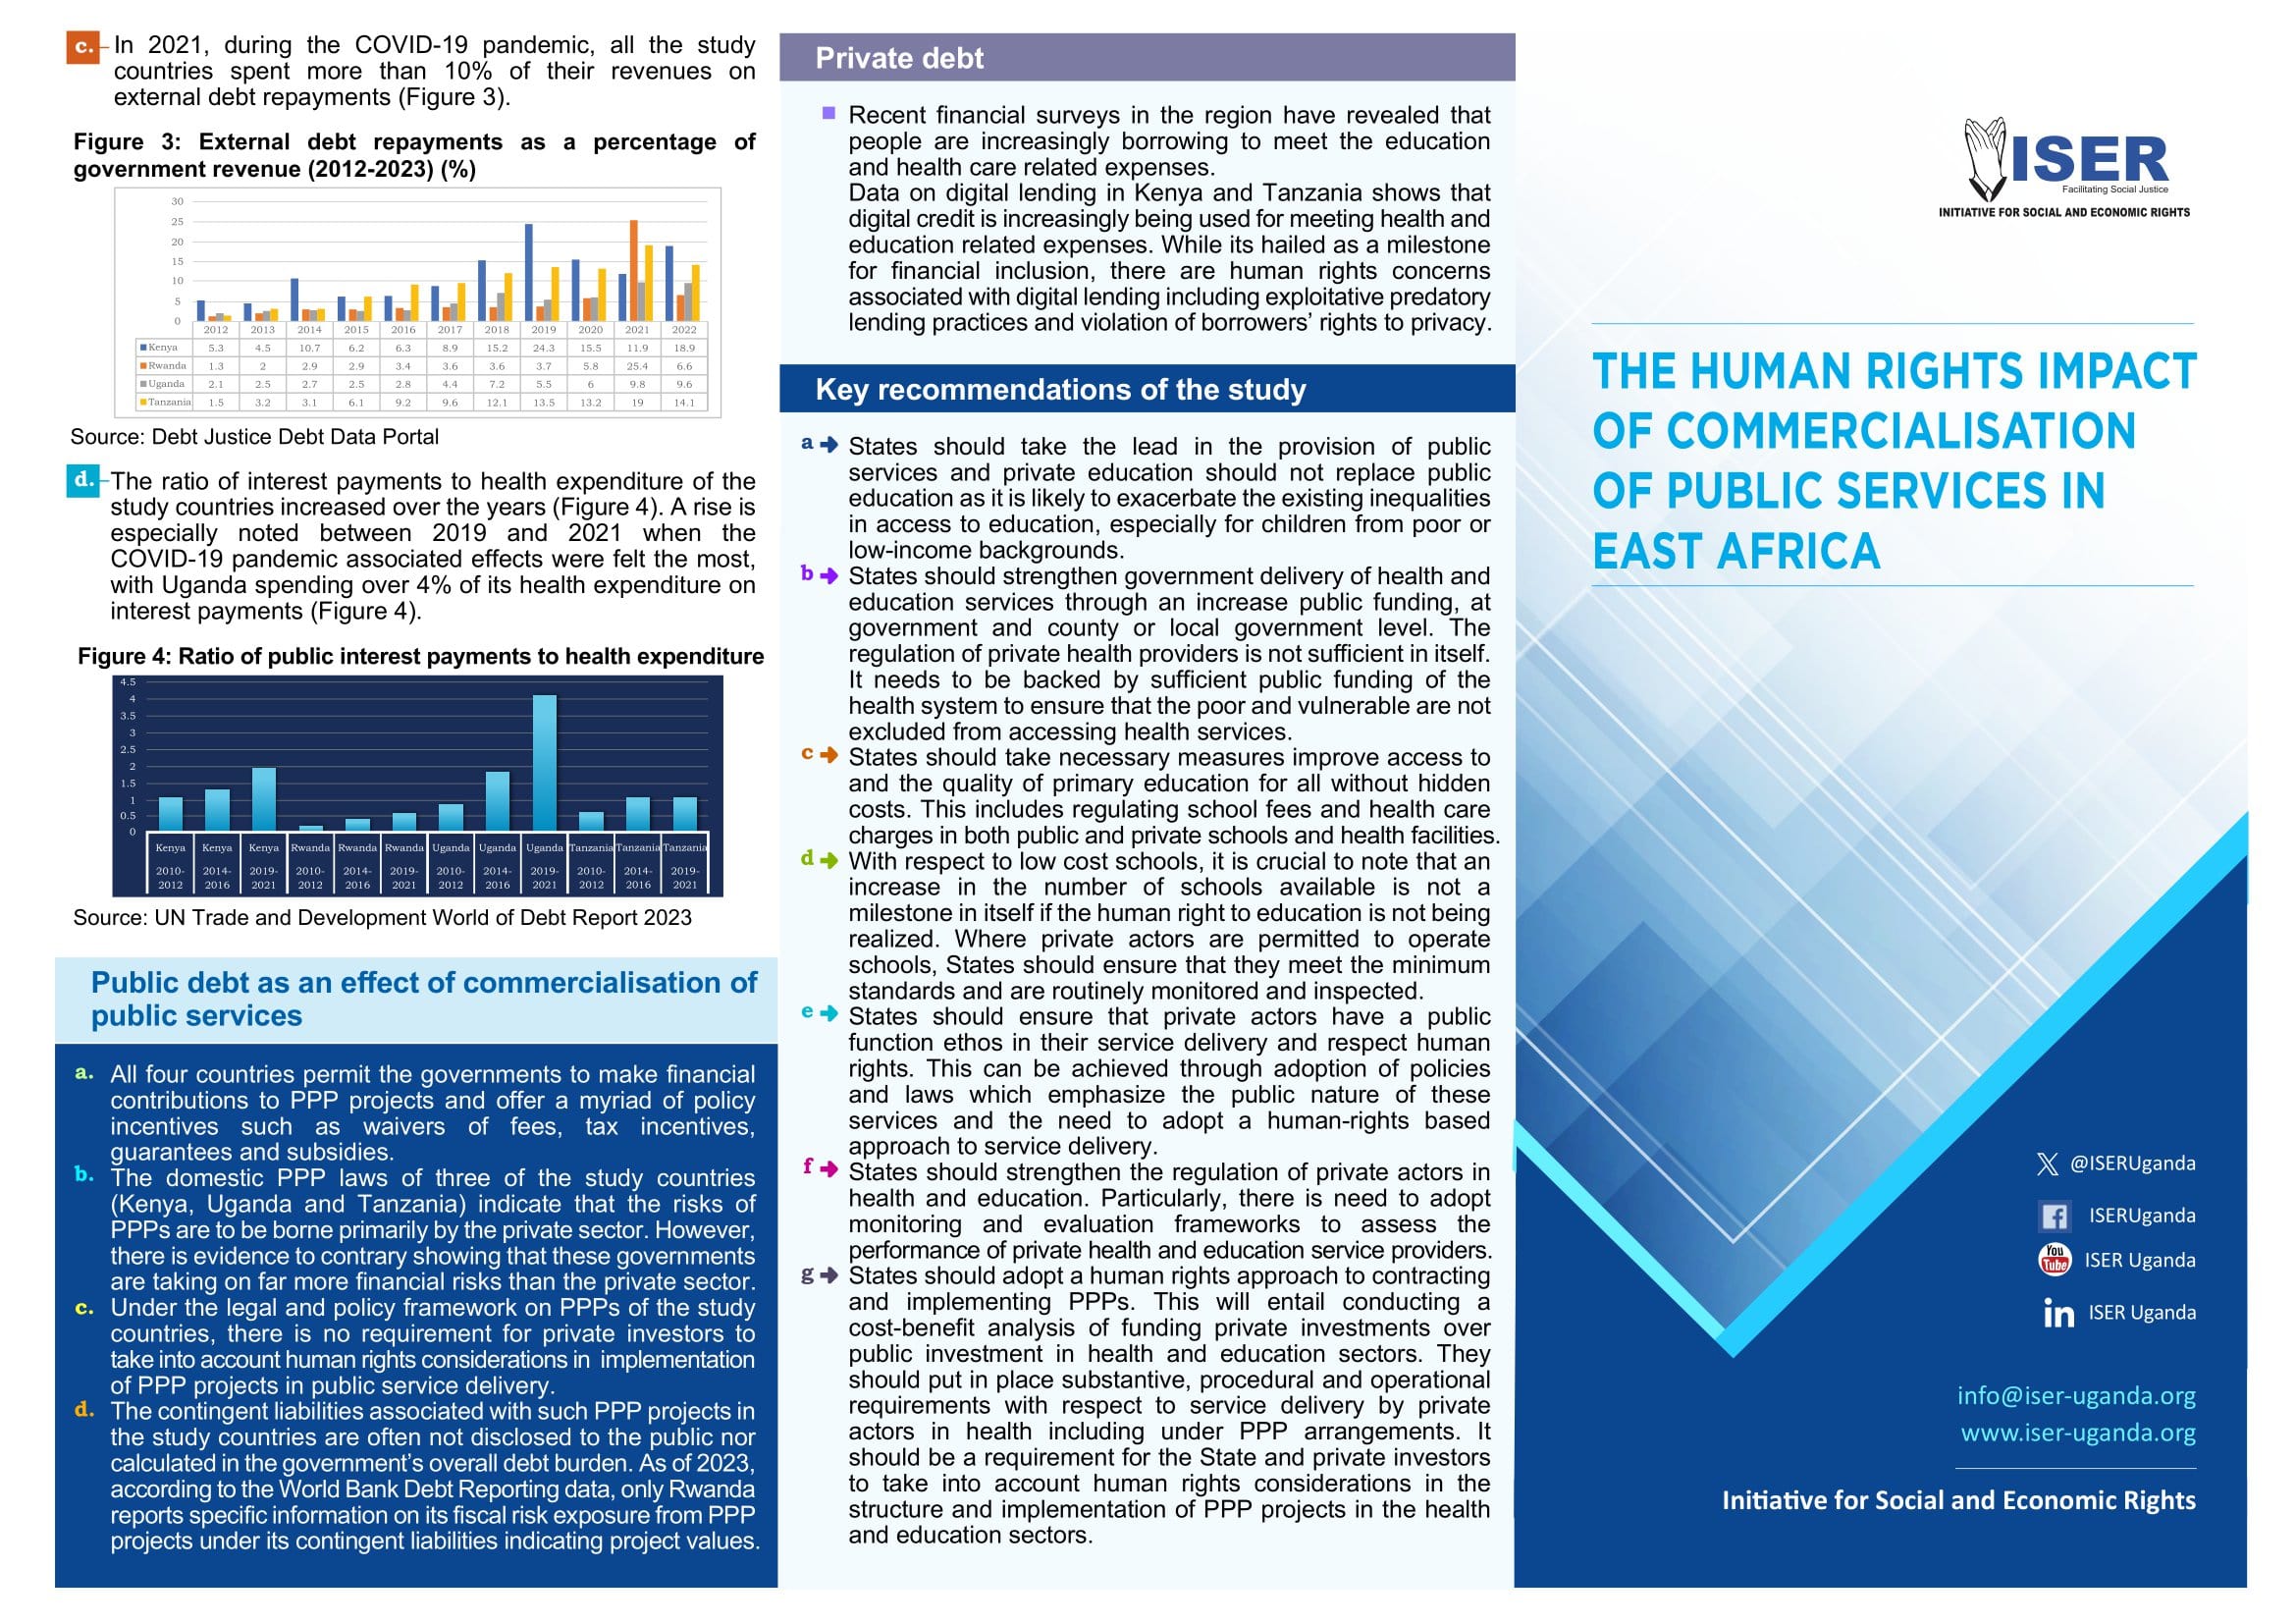 Report Summary - The human rights impact of commercialisation of public services in East Africa